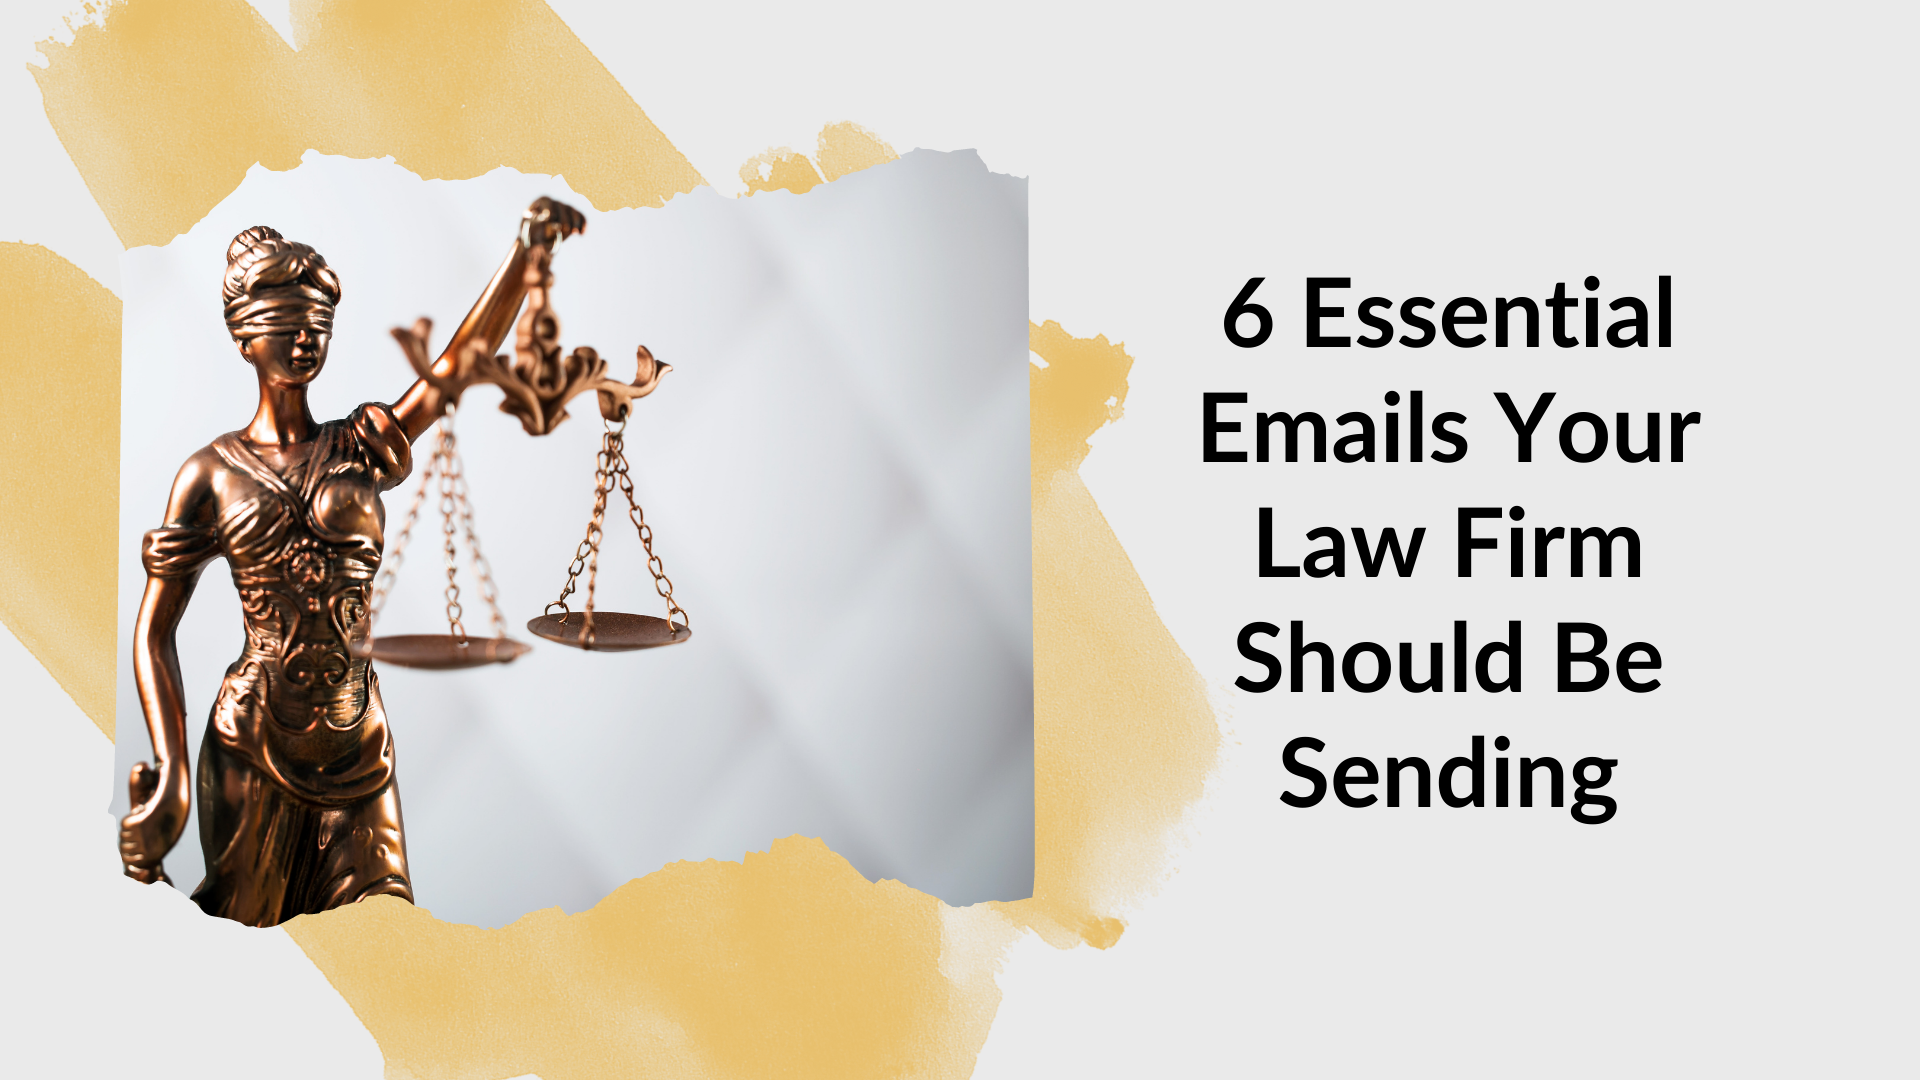 6 Essential Emails Your Law Firm Should Be Sending